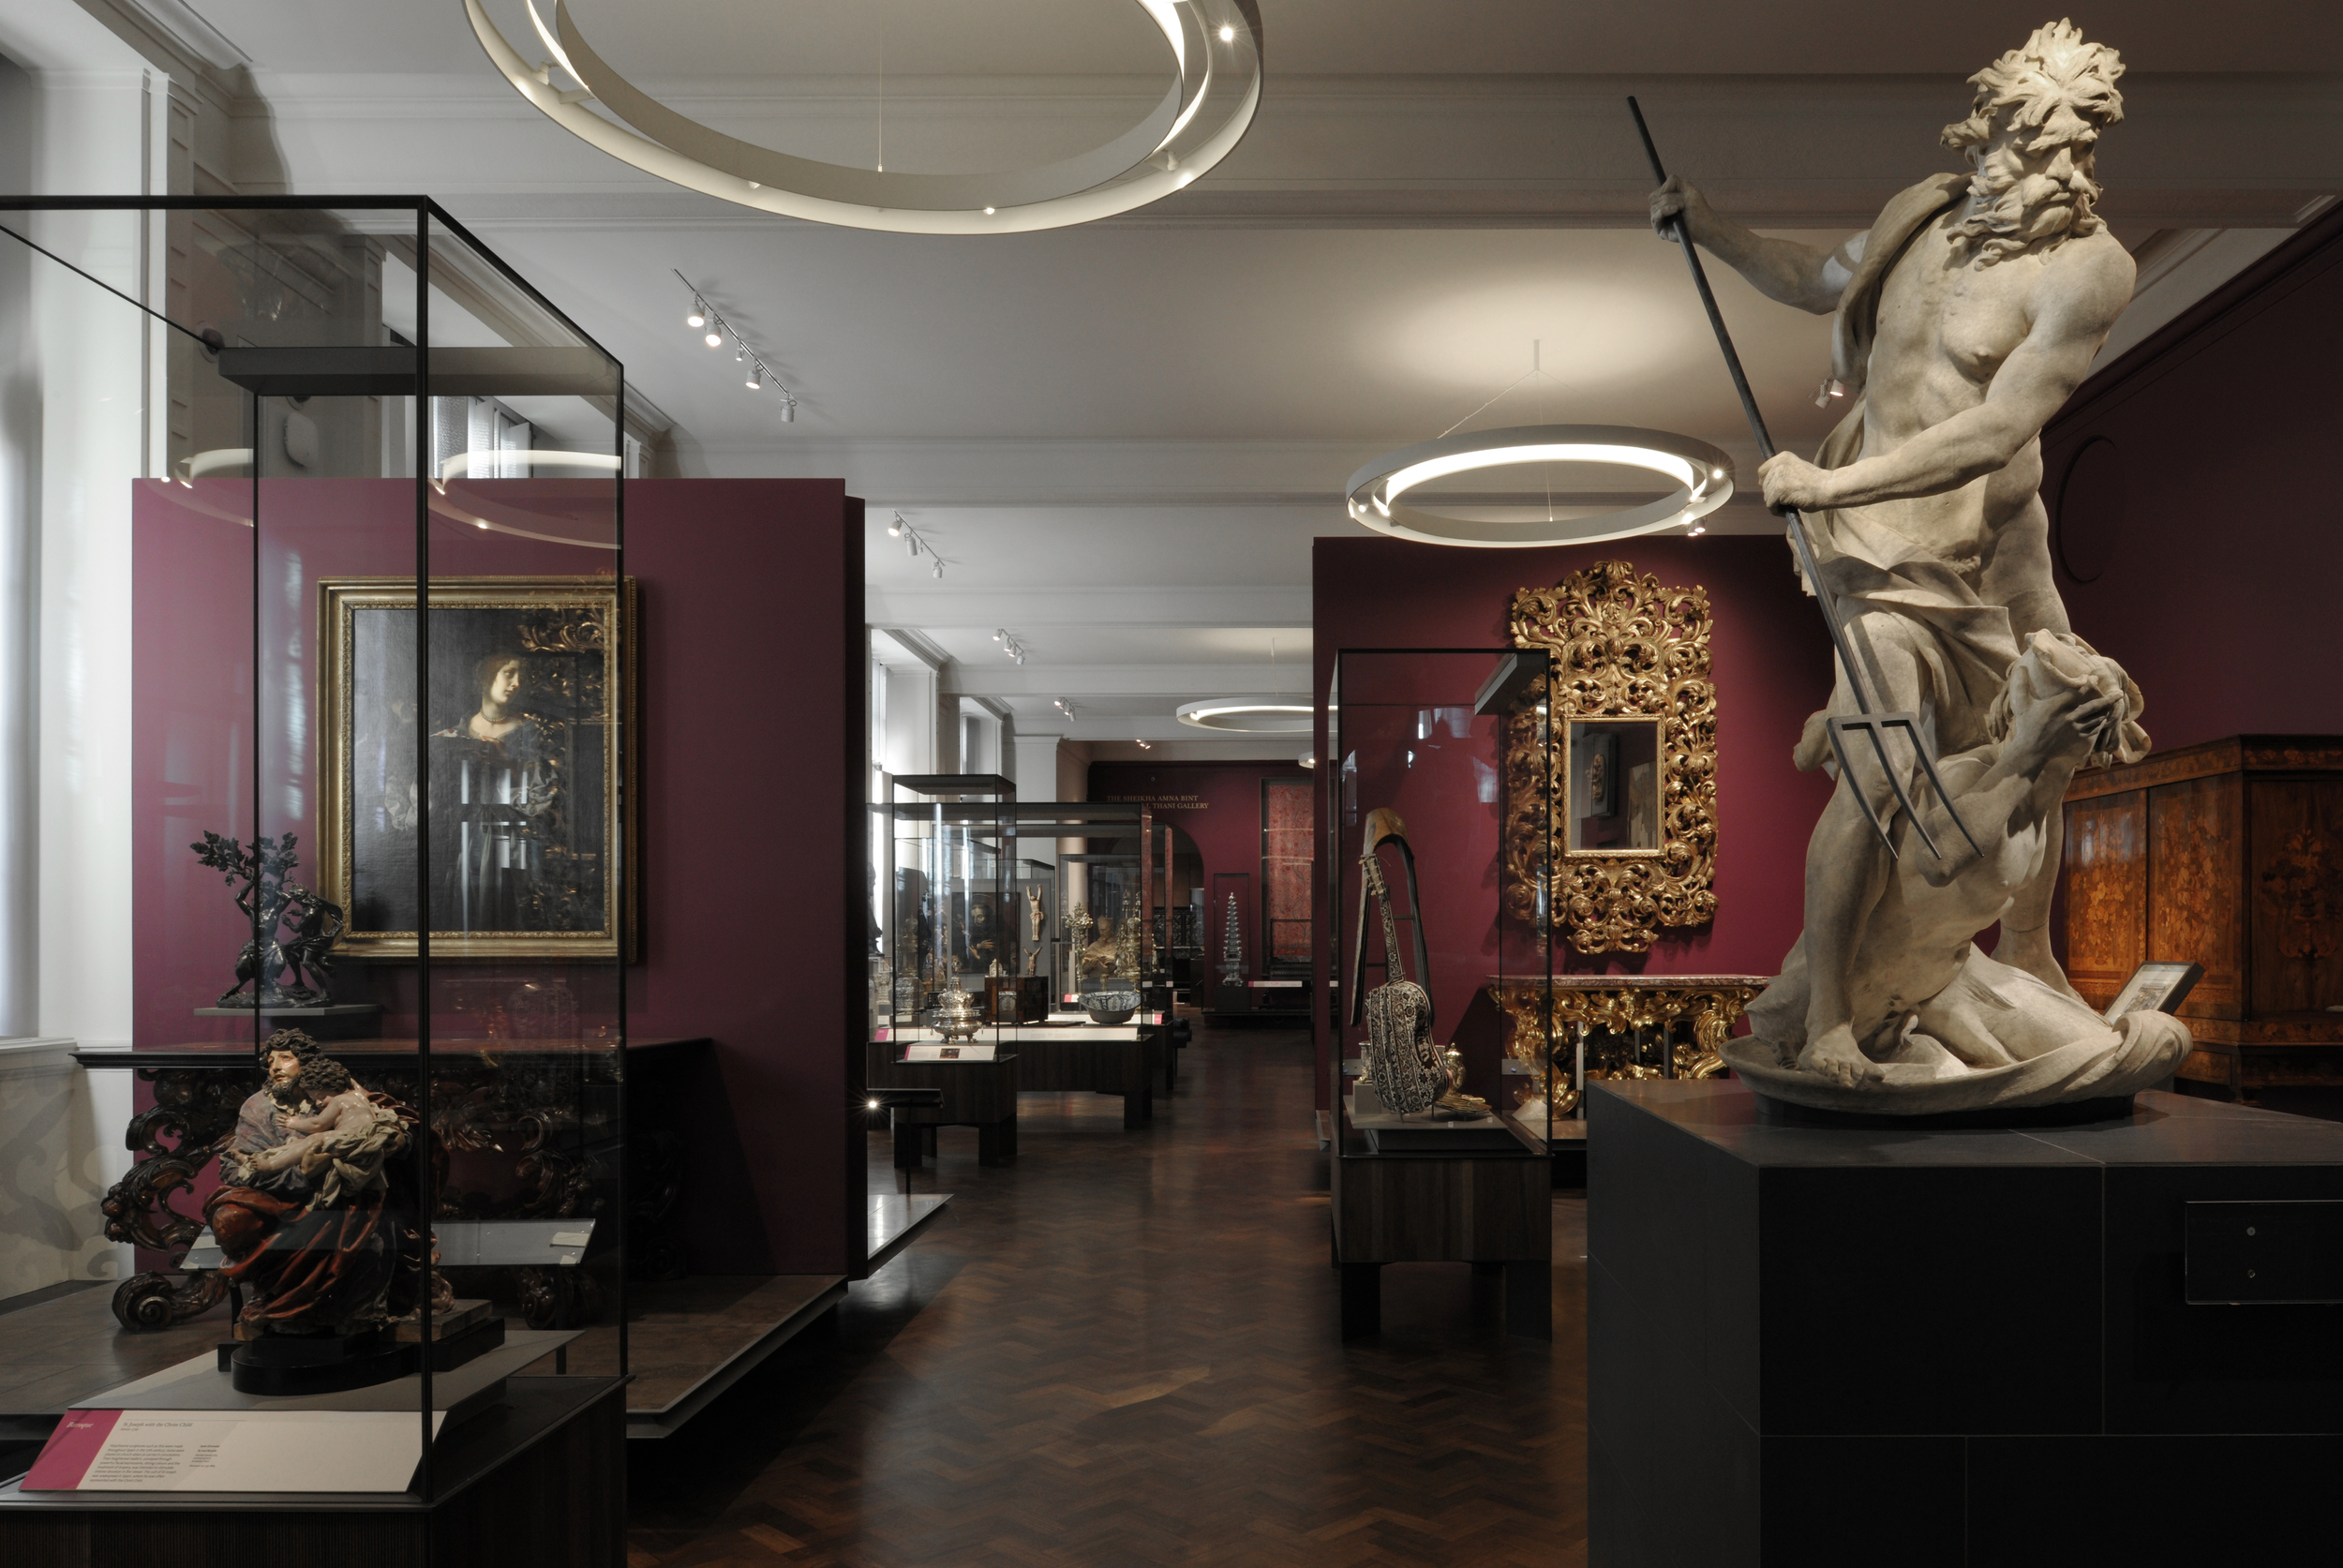  The V&amp;A's  Europe 1600-1815 galleries  reopened to the public in December 2015 after a four-year £12.5m renovation. 